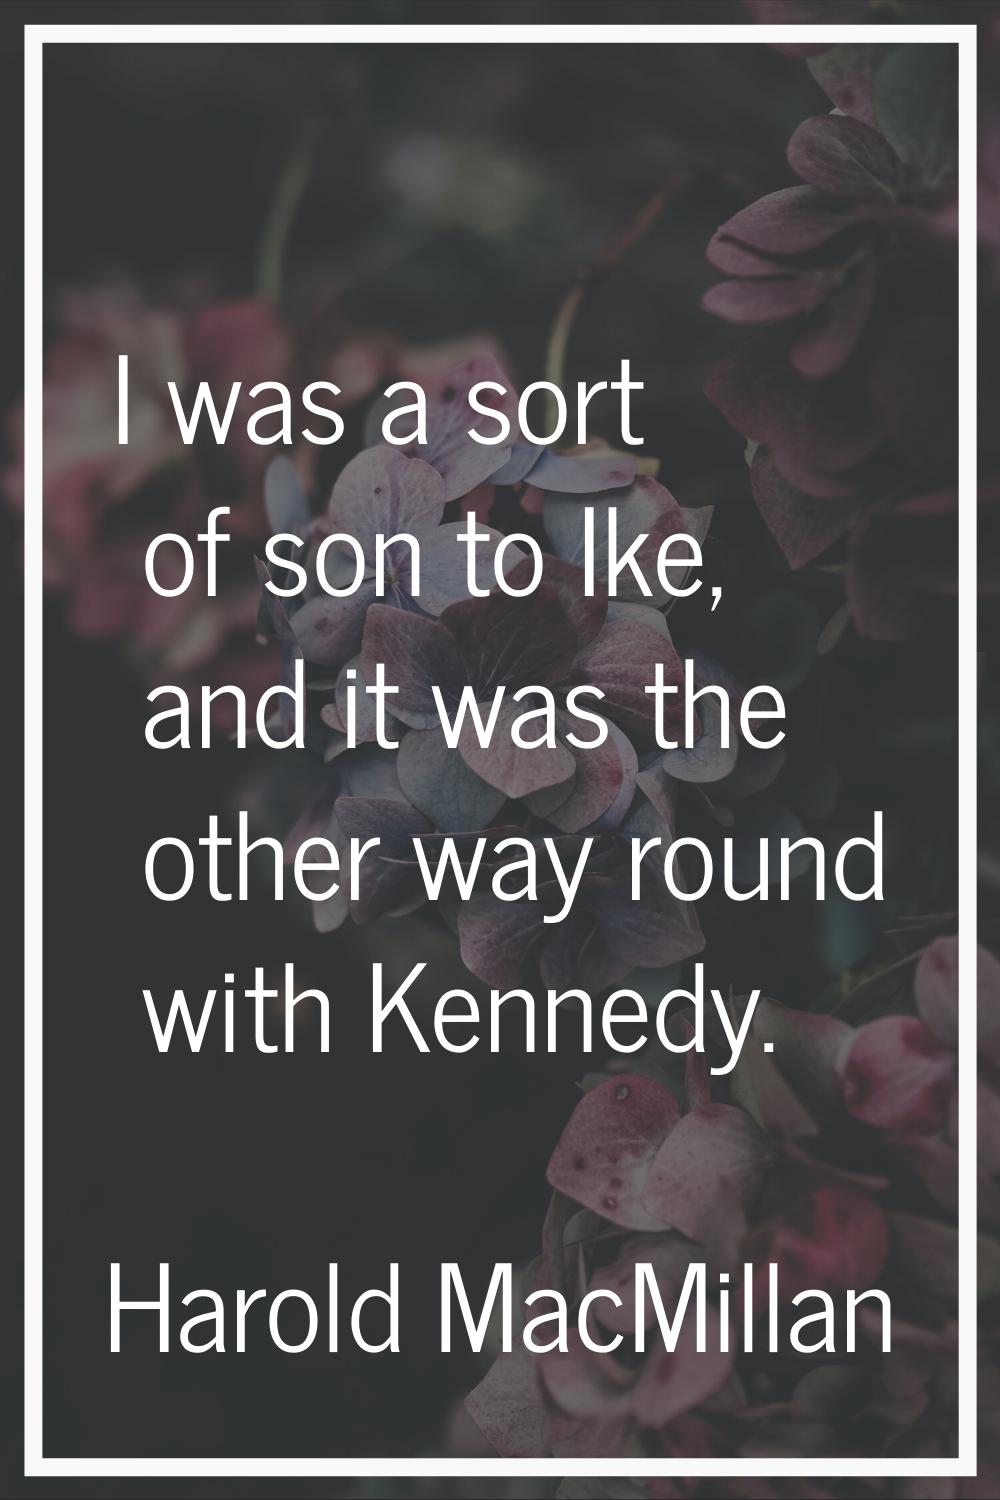 I was a sort of son to Ike, and it was the other way round with Kennedy.